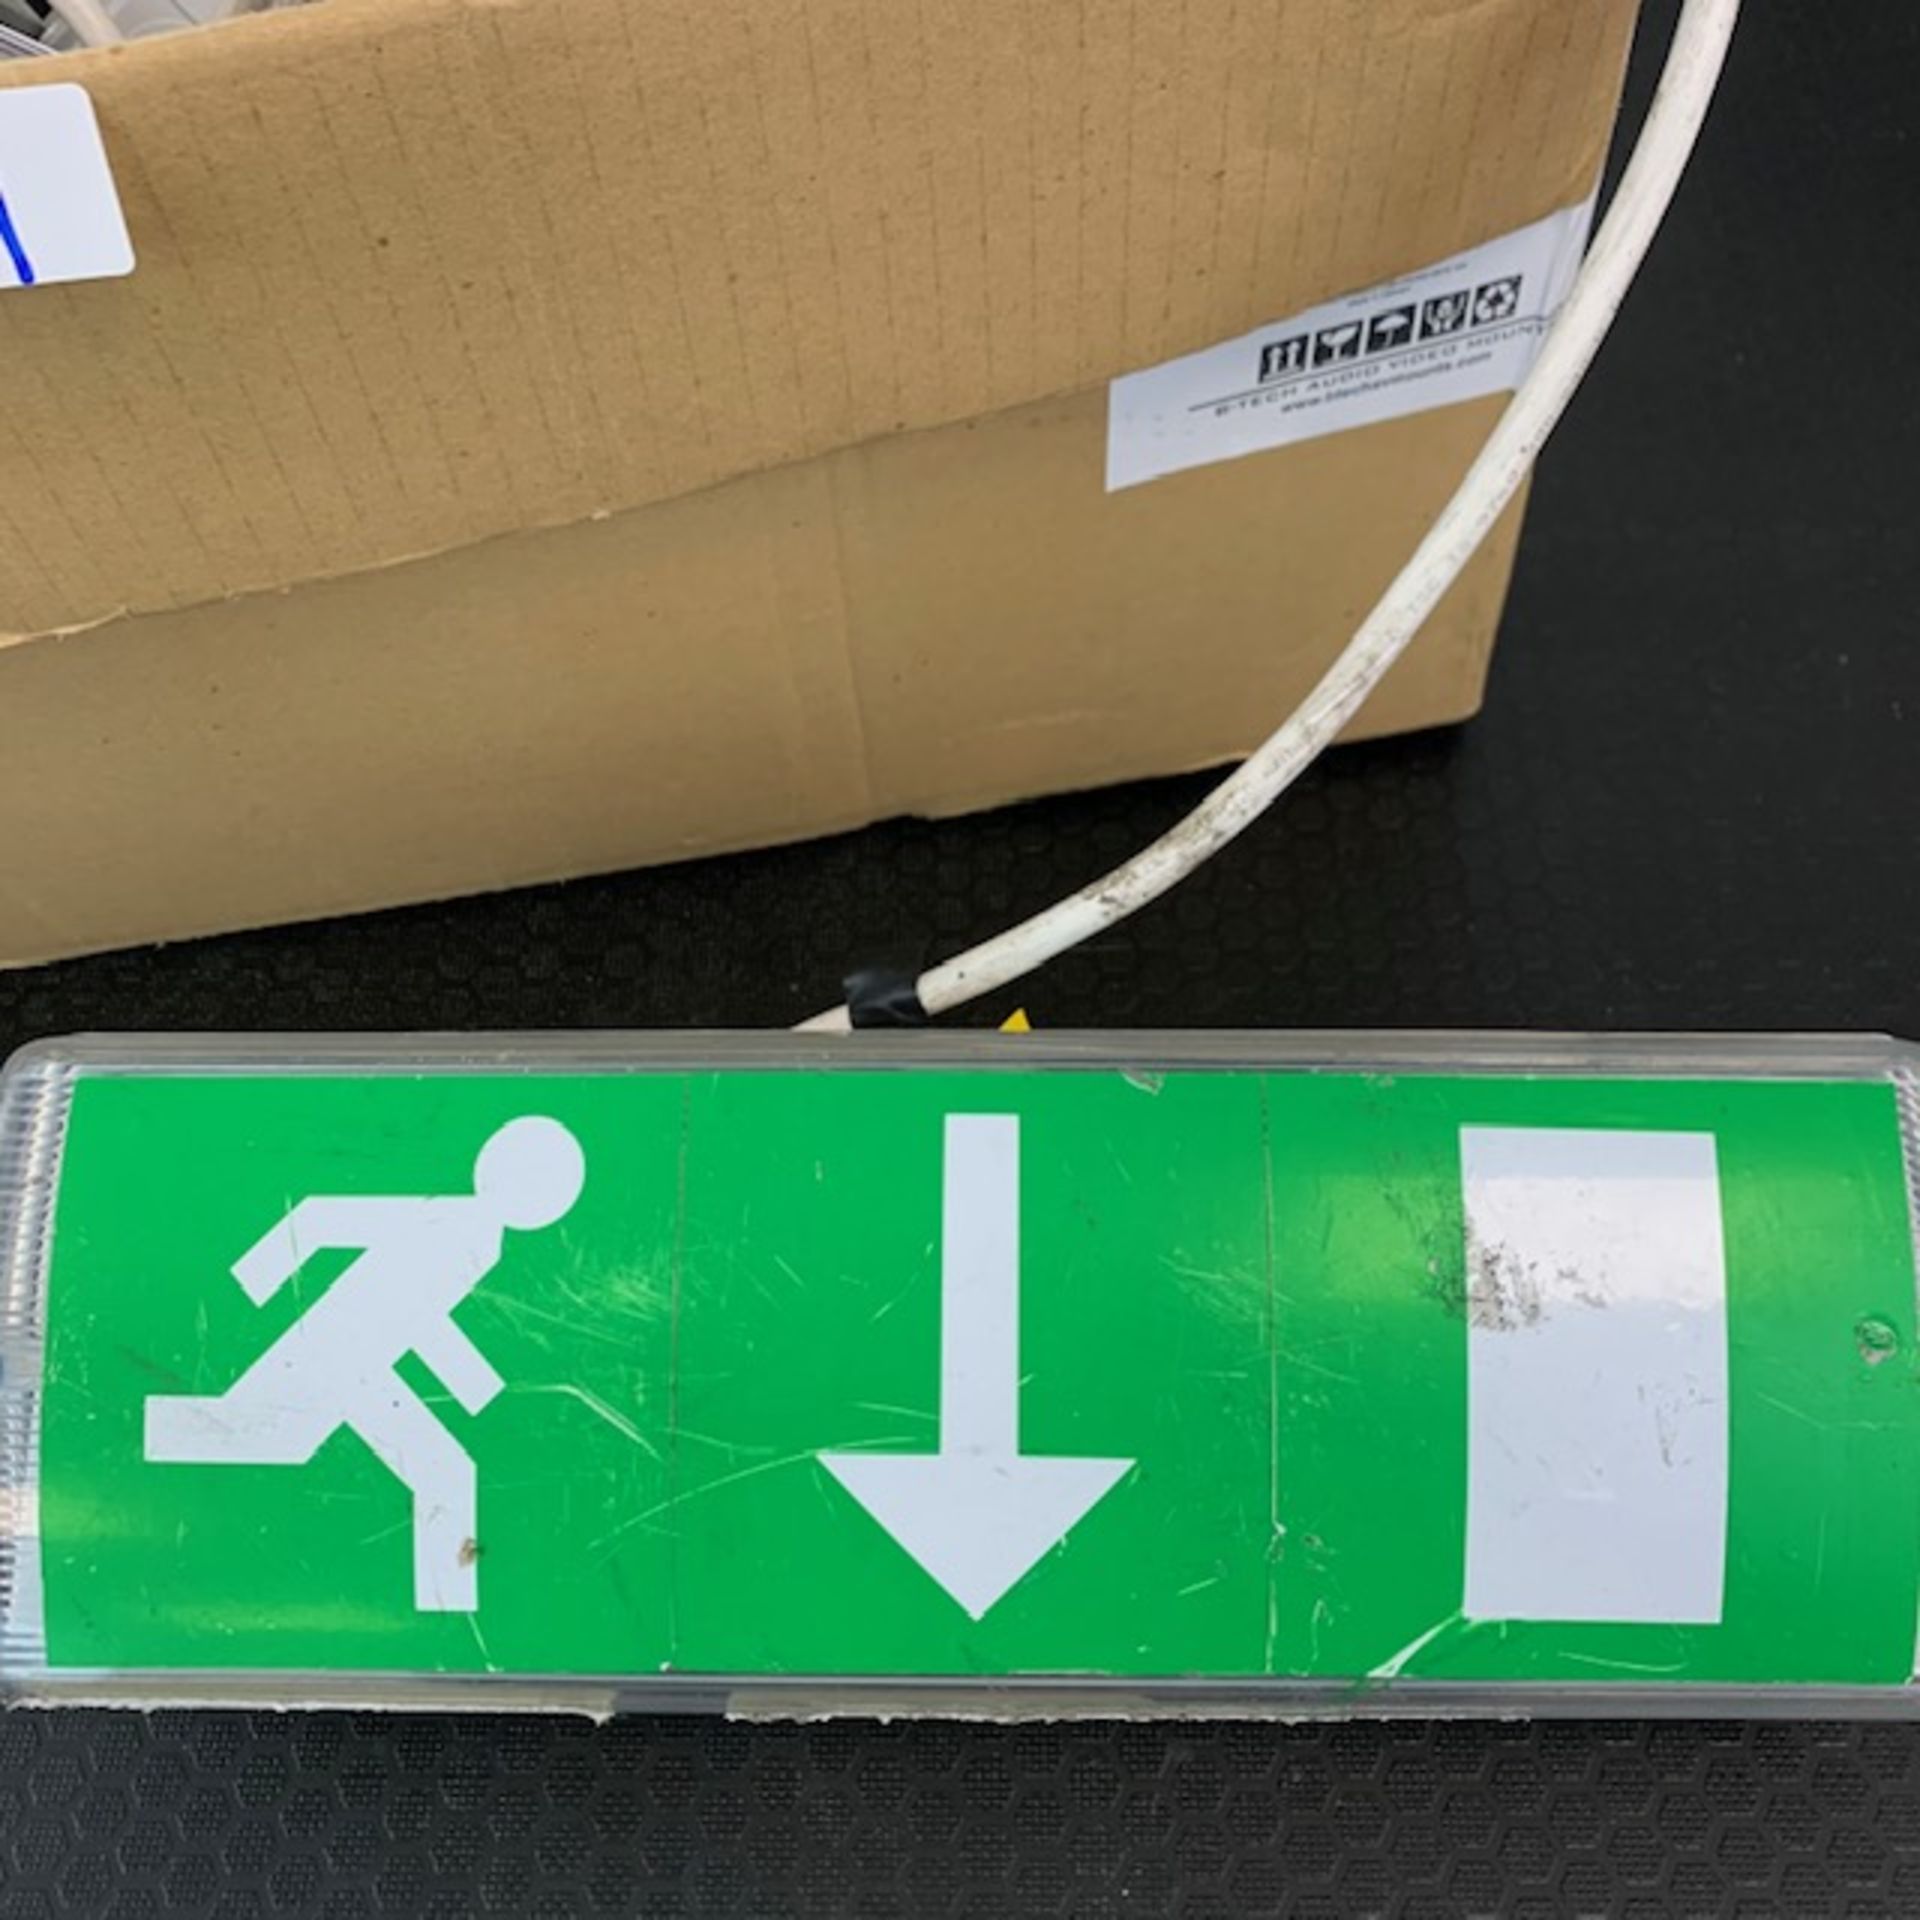 5 X Emergency Exit Lights In Box - Ref: 1339 - CL581 - Location: Altrincham Wa14 - Image 2 of 2